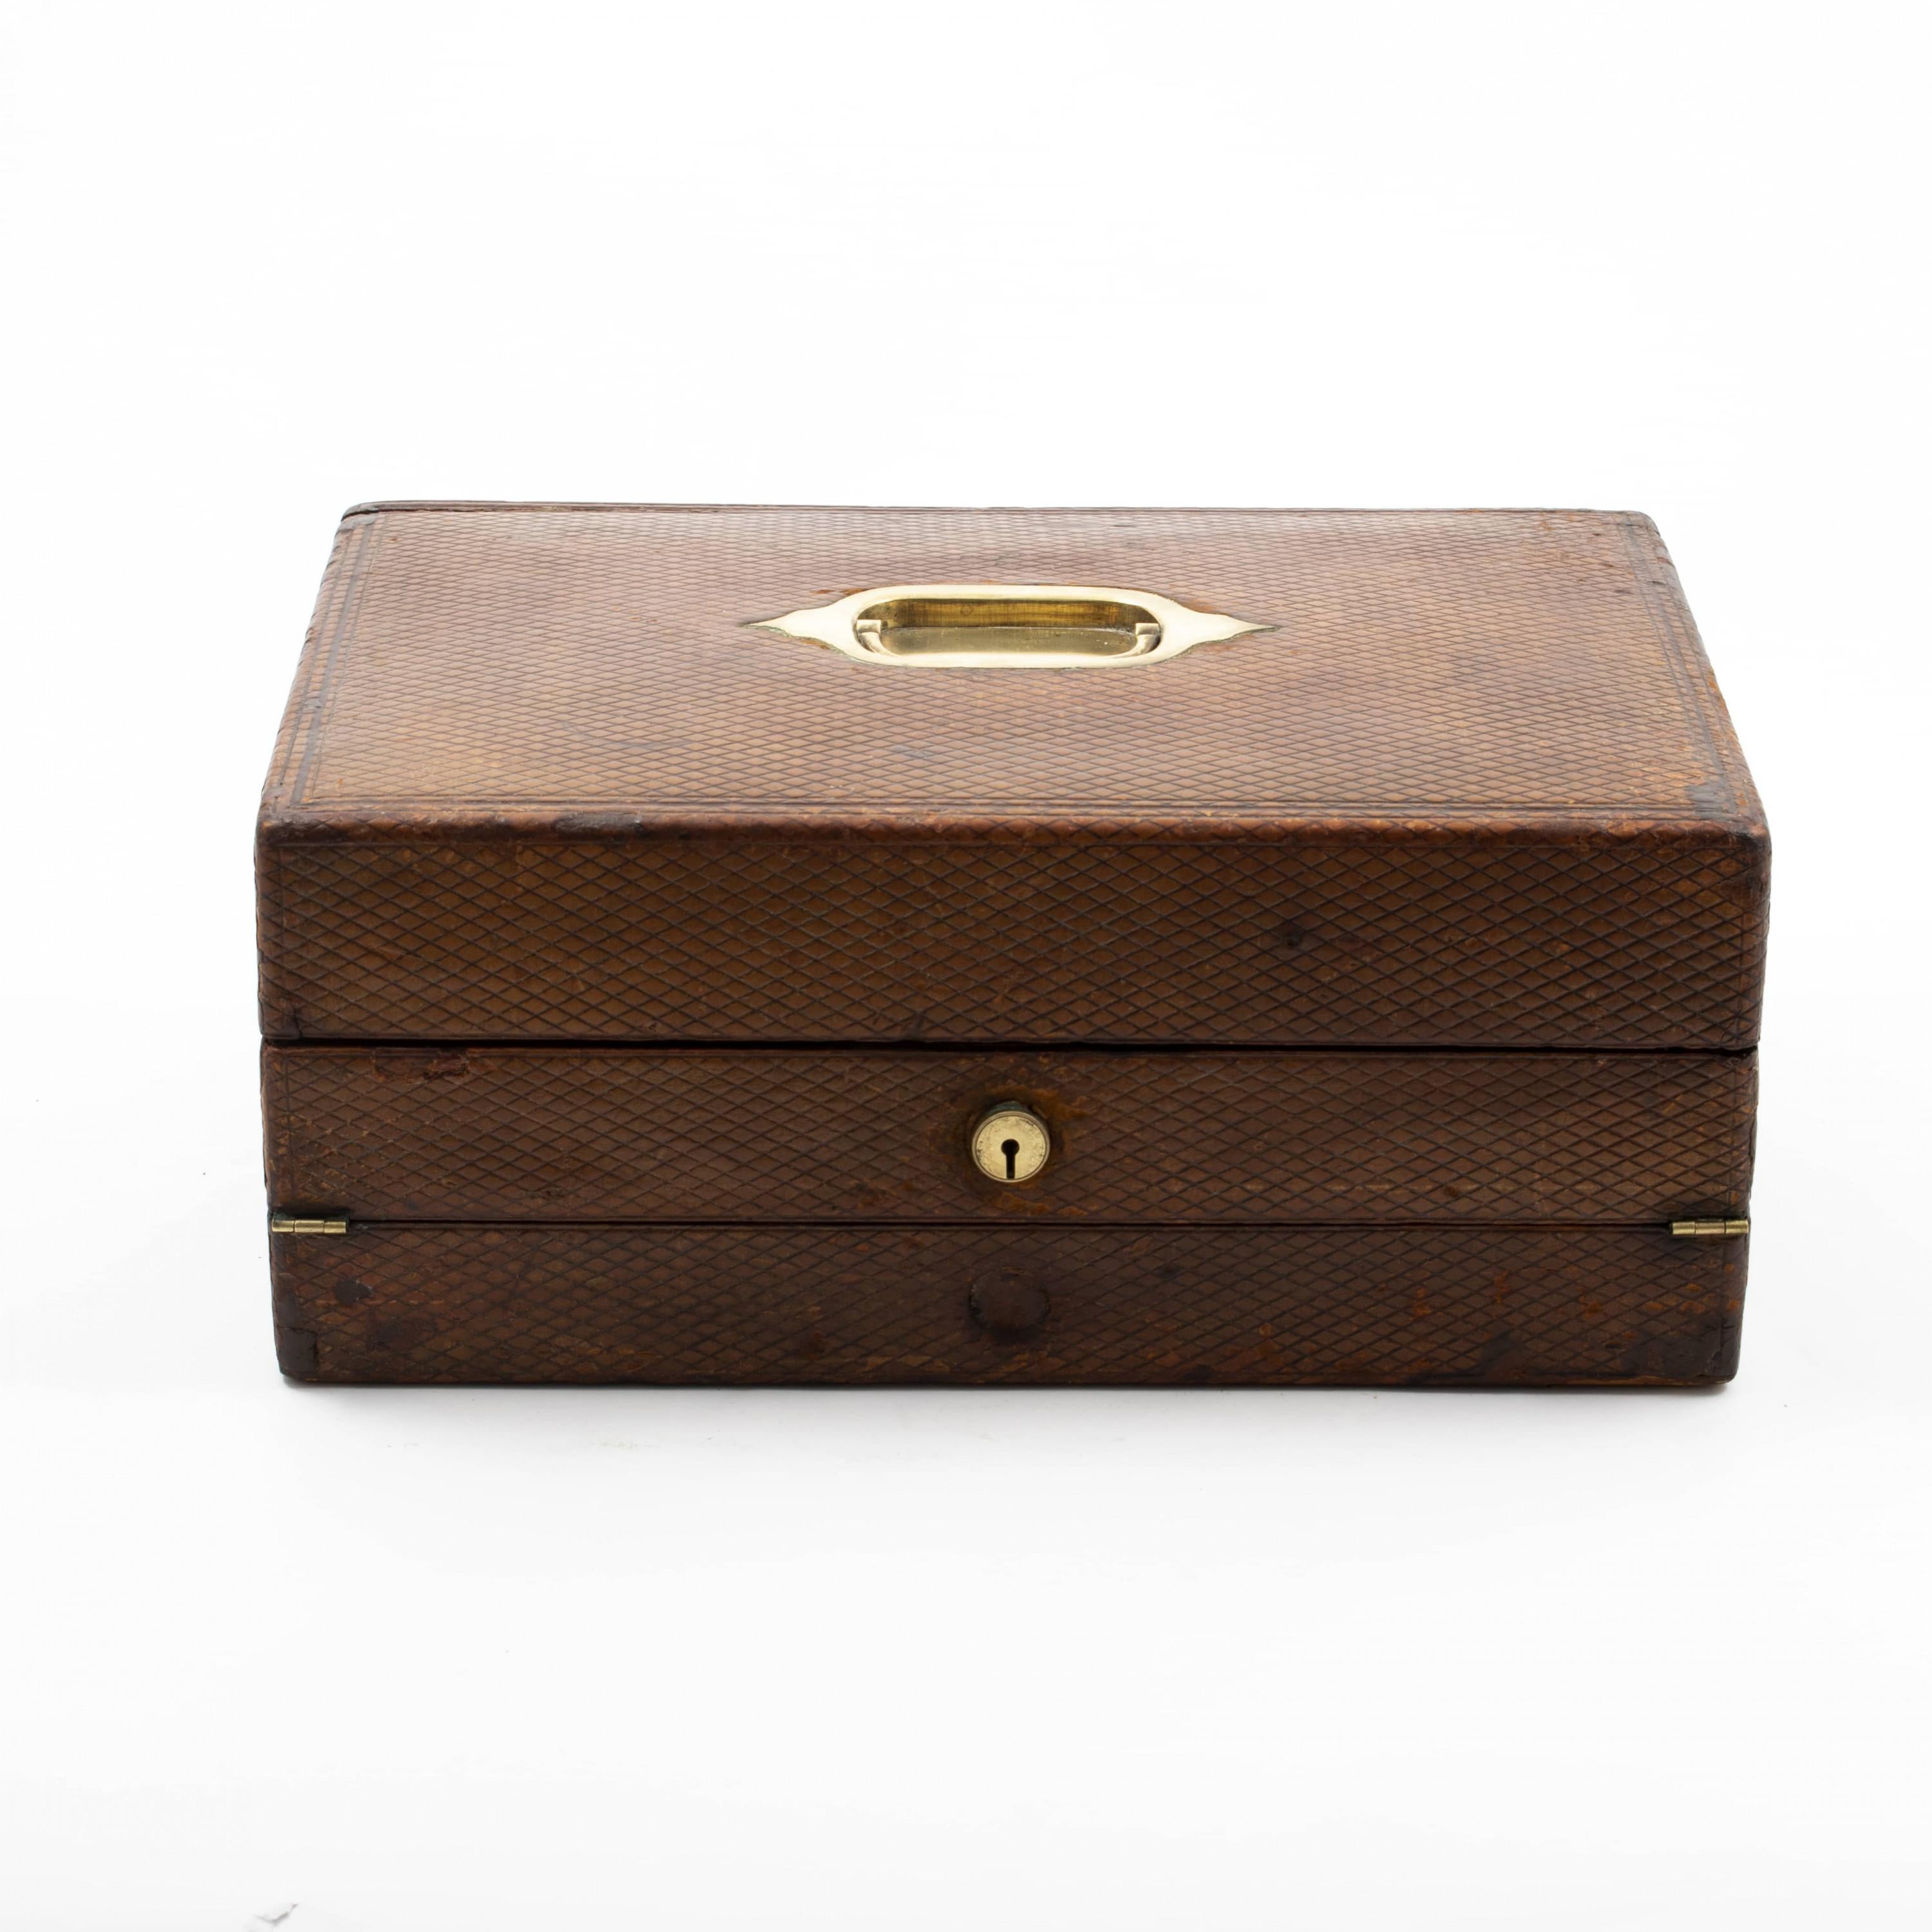 Rare regency travelling writing slope / nécessaire de voyage of outstanding quality.
Wooden box, the exterior dressed in brown leather, bound and embossed with diamond shaped pattern. Top fitted with a brass handle.
The lid opens to reveal a black